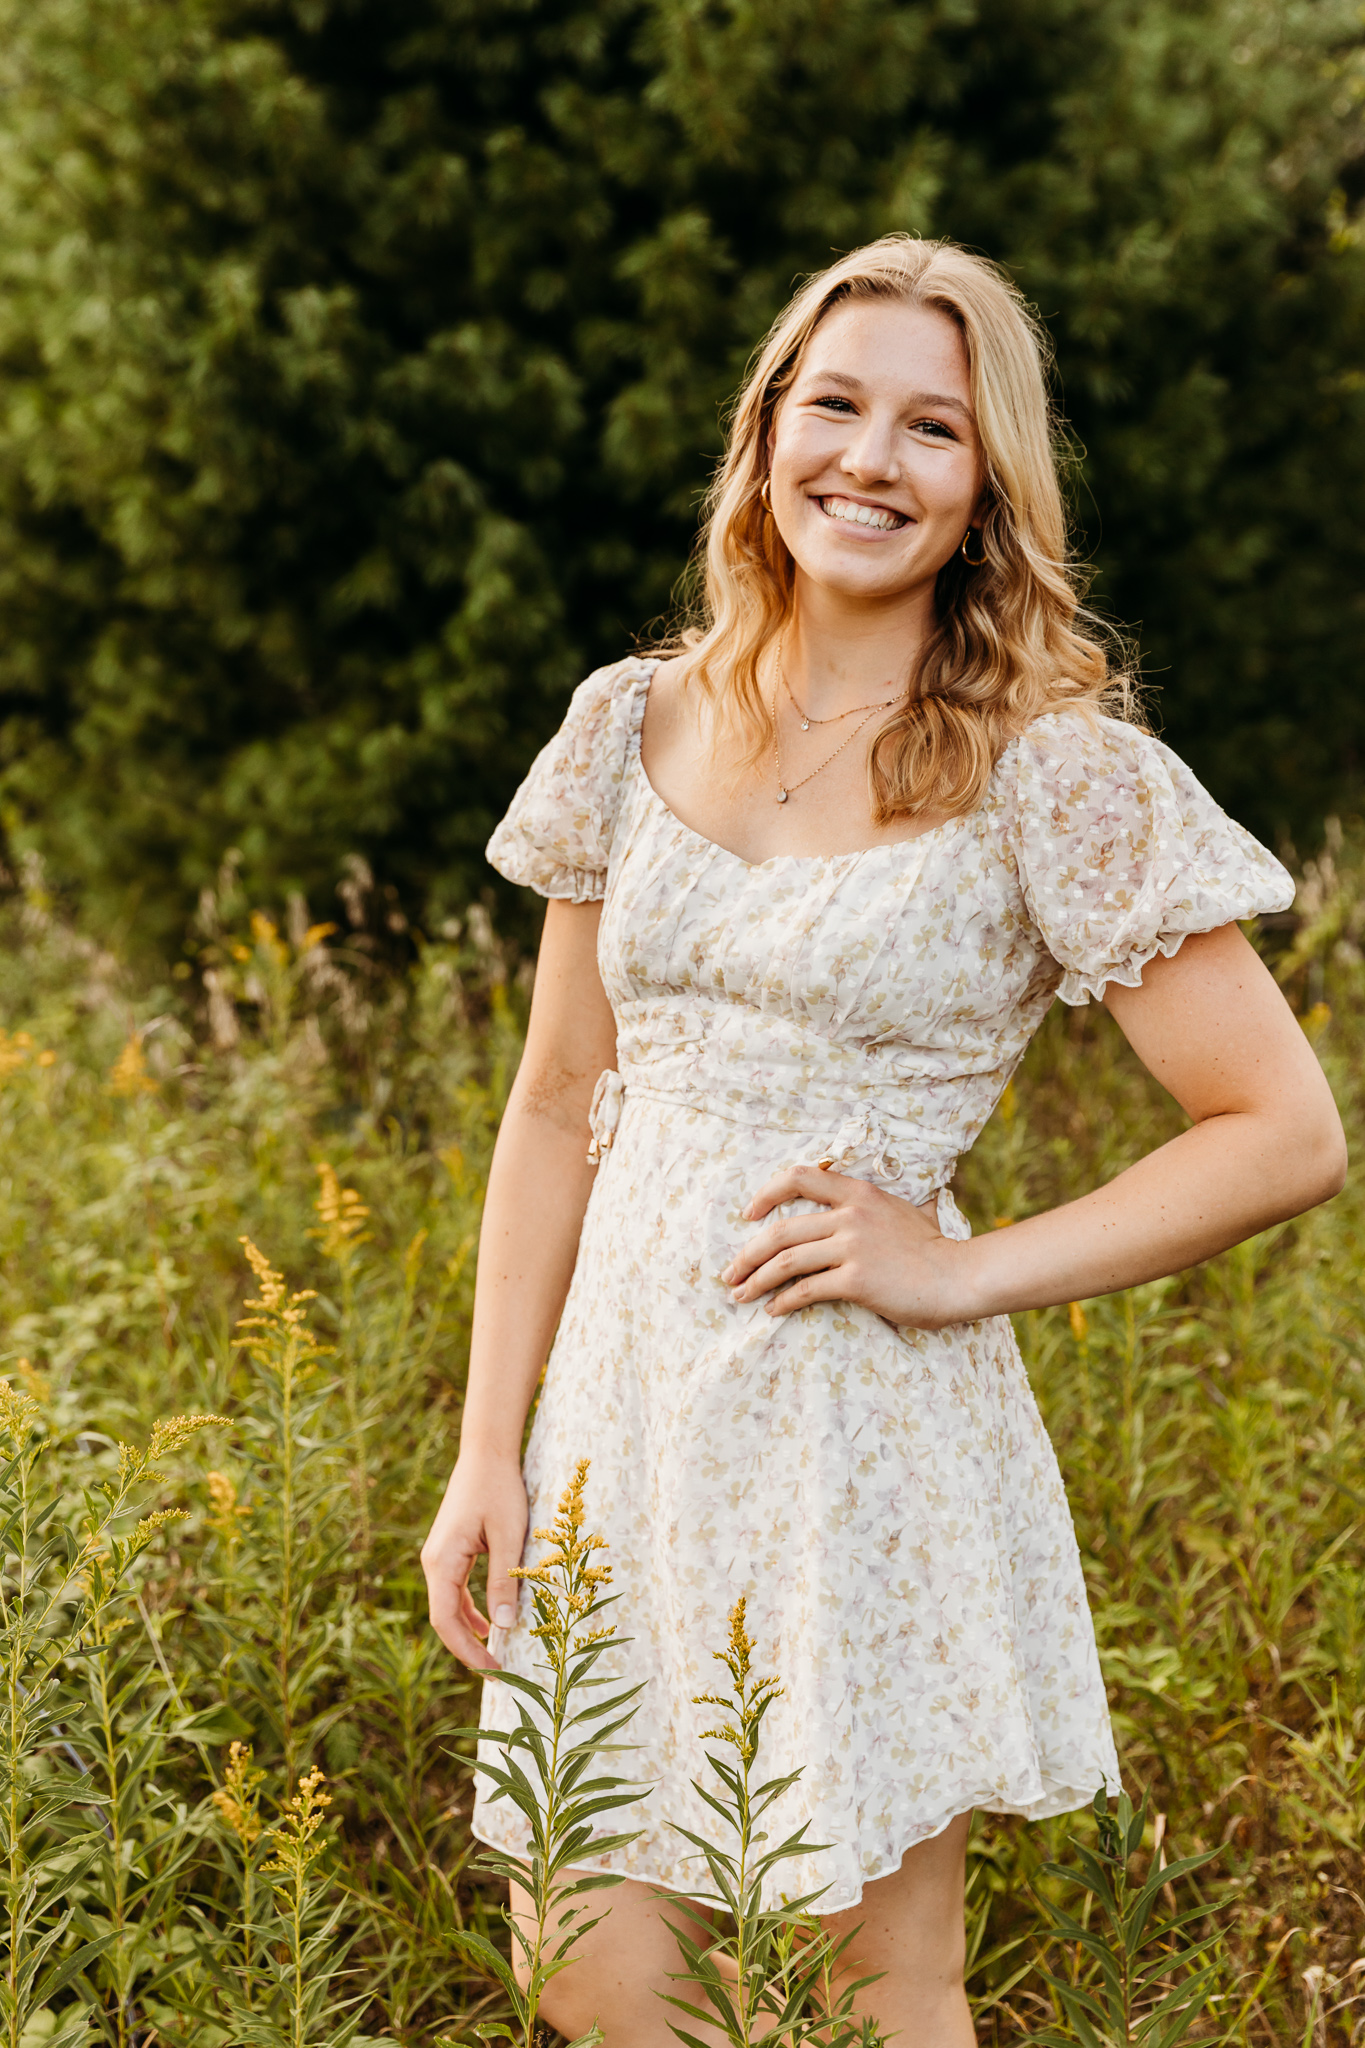 high school senior in a white dress posing in a field of goldenrod at sunset